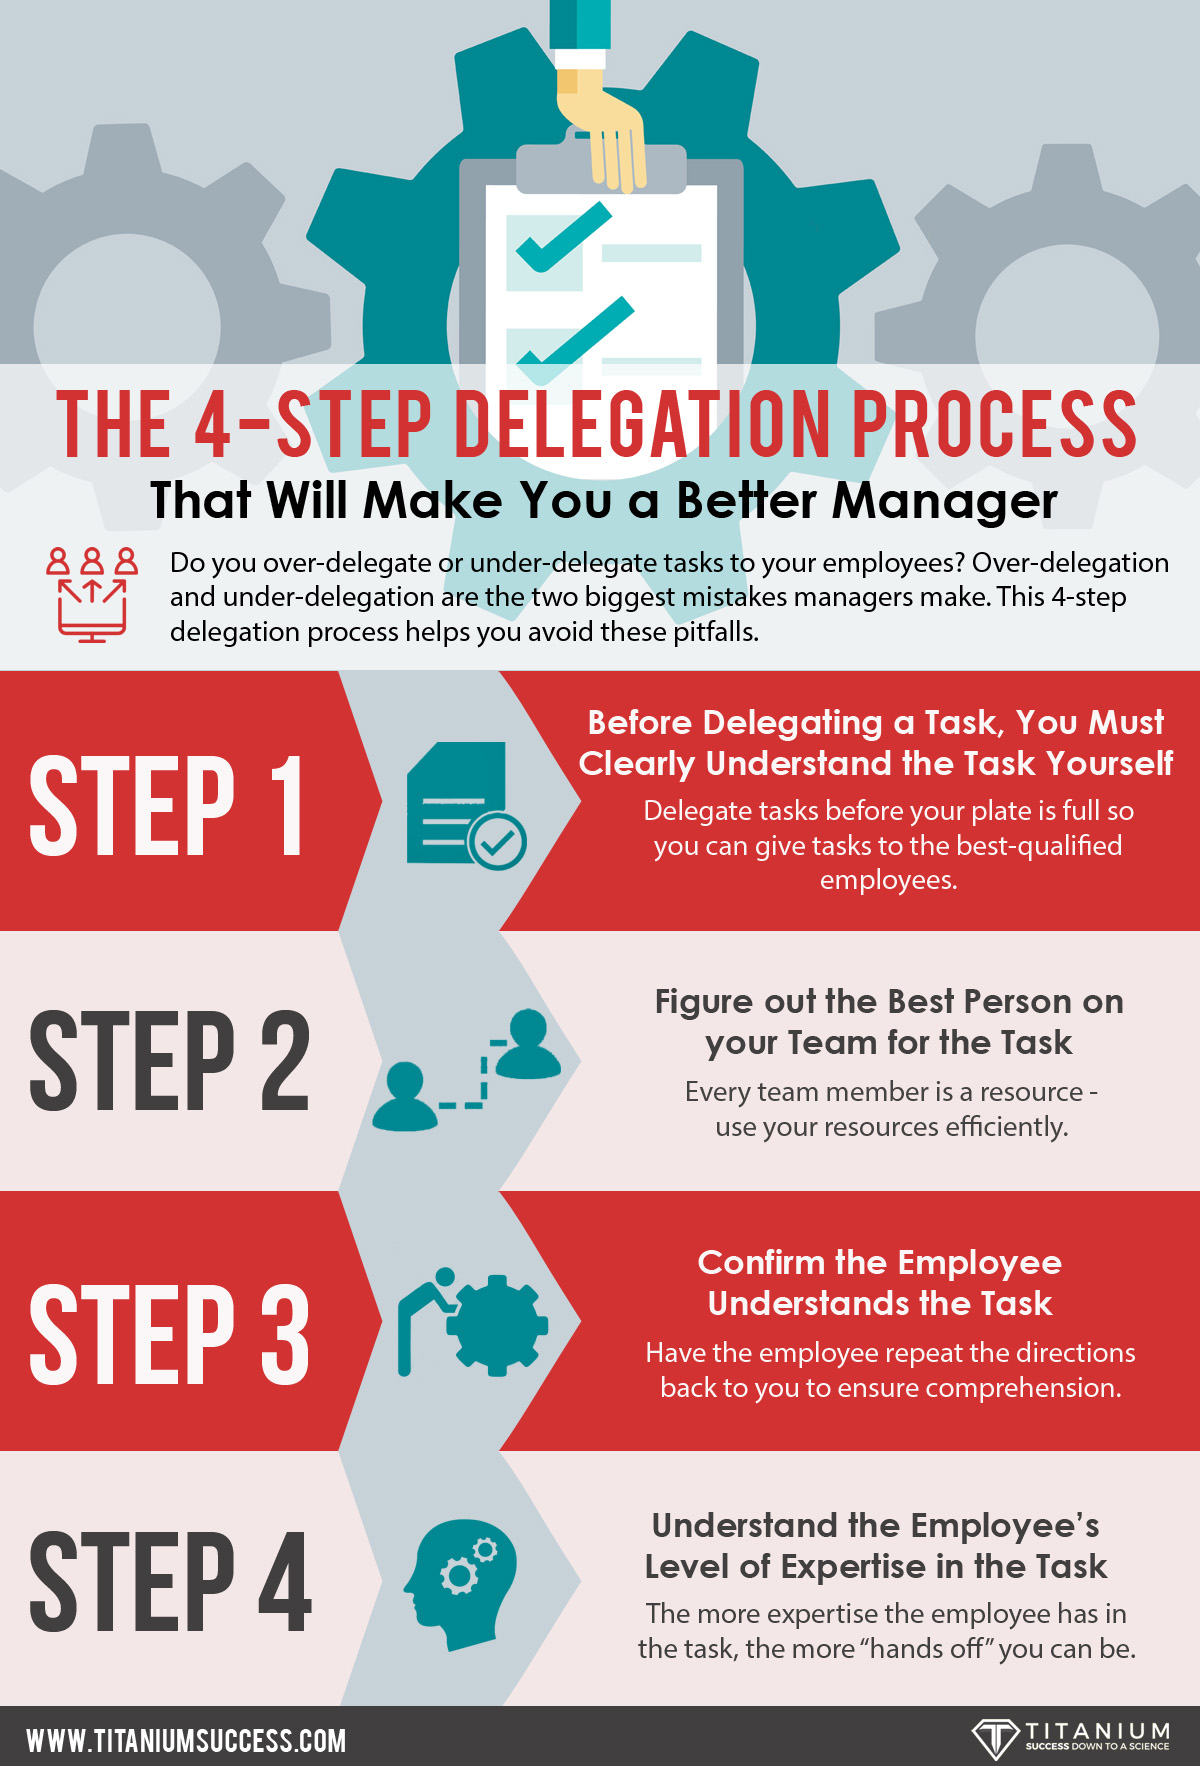 The 4-Step Delegation Process Infographic - TS